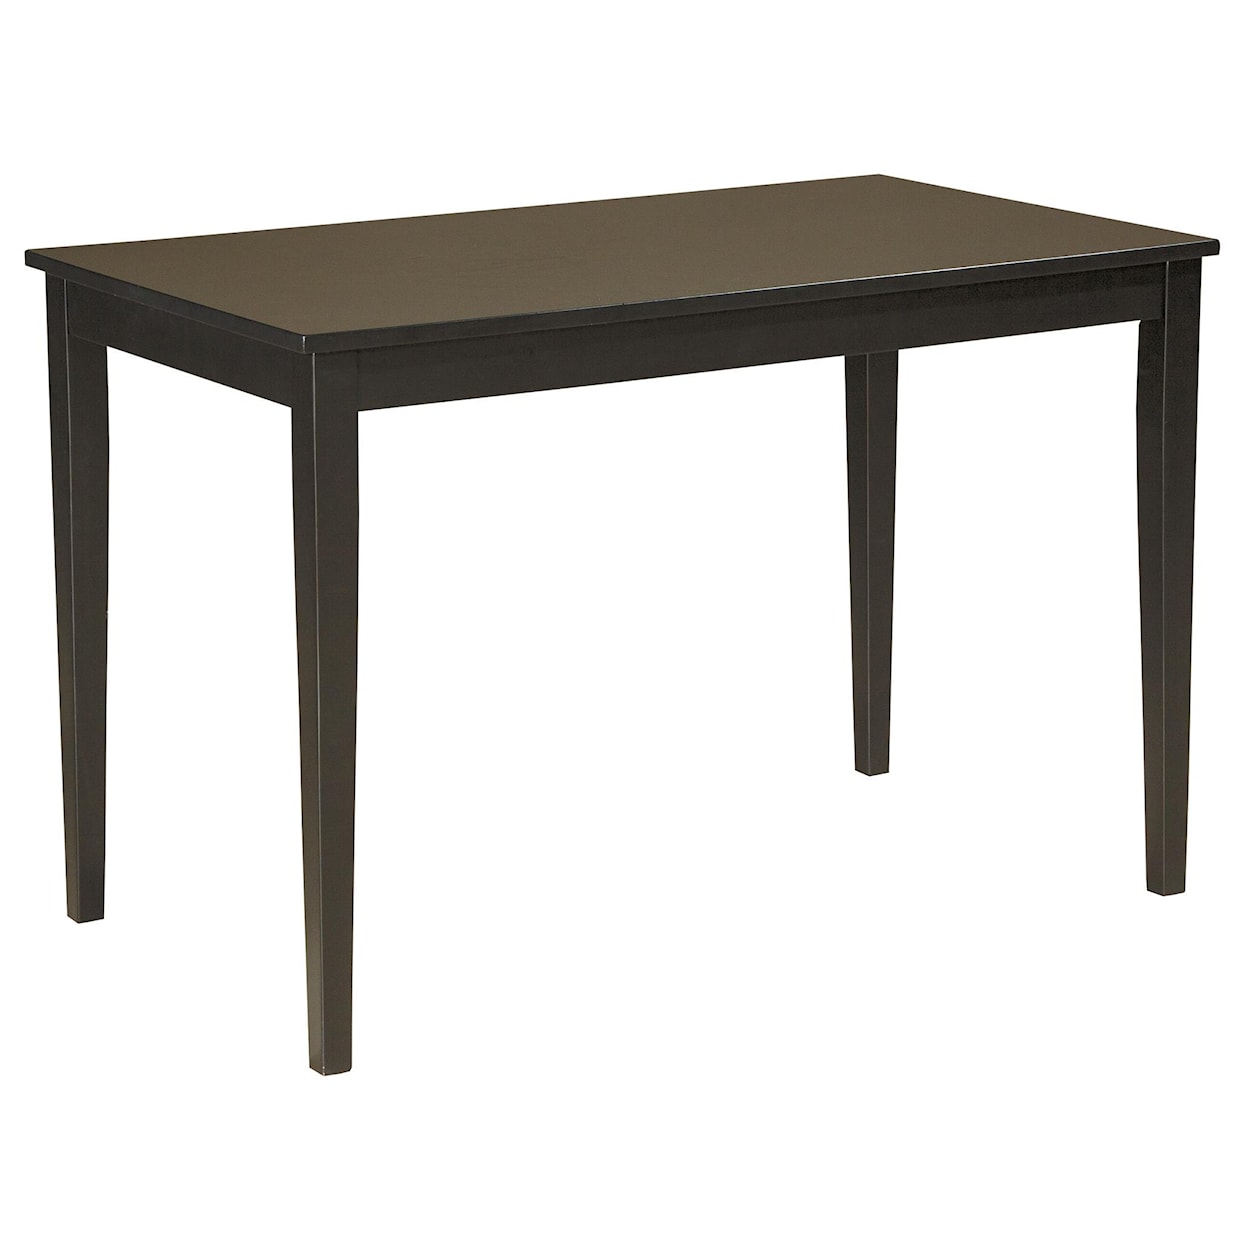 Signature Design by Ashley Furniture Kimonte Rectangular Dining Room Table